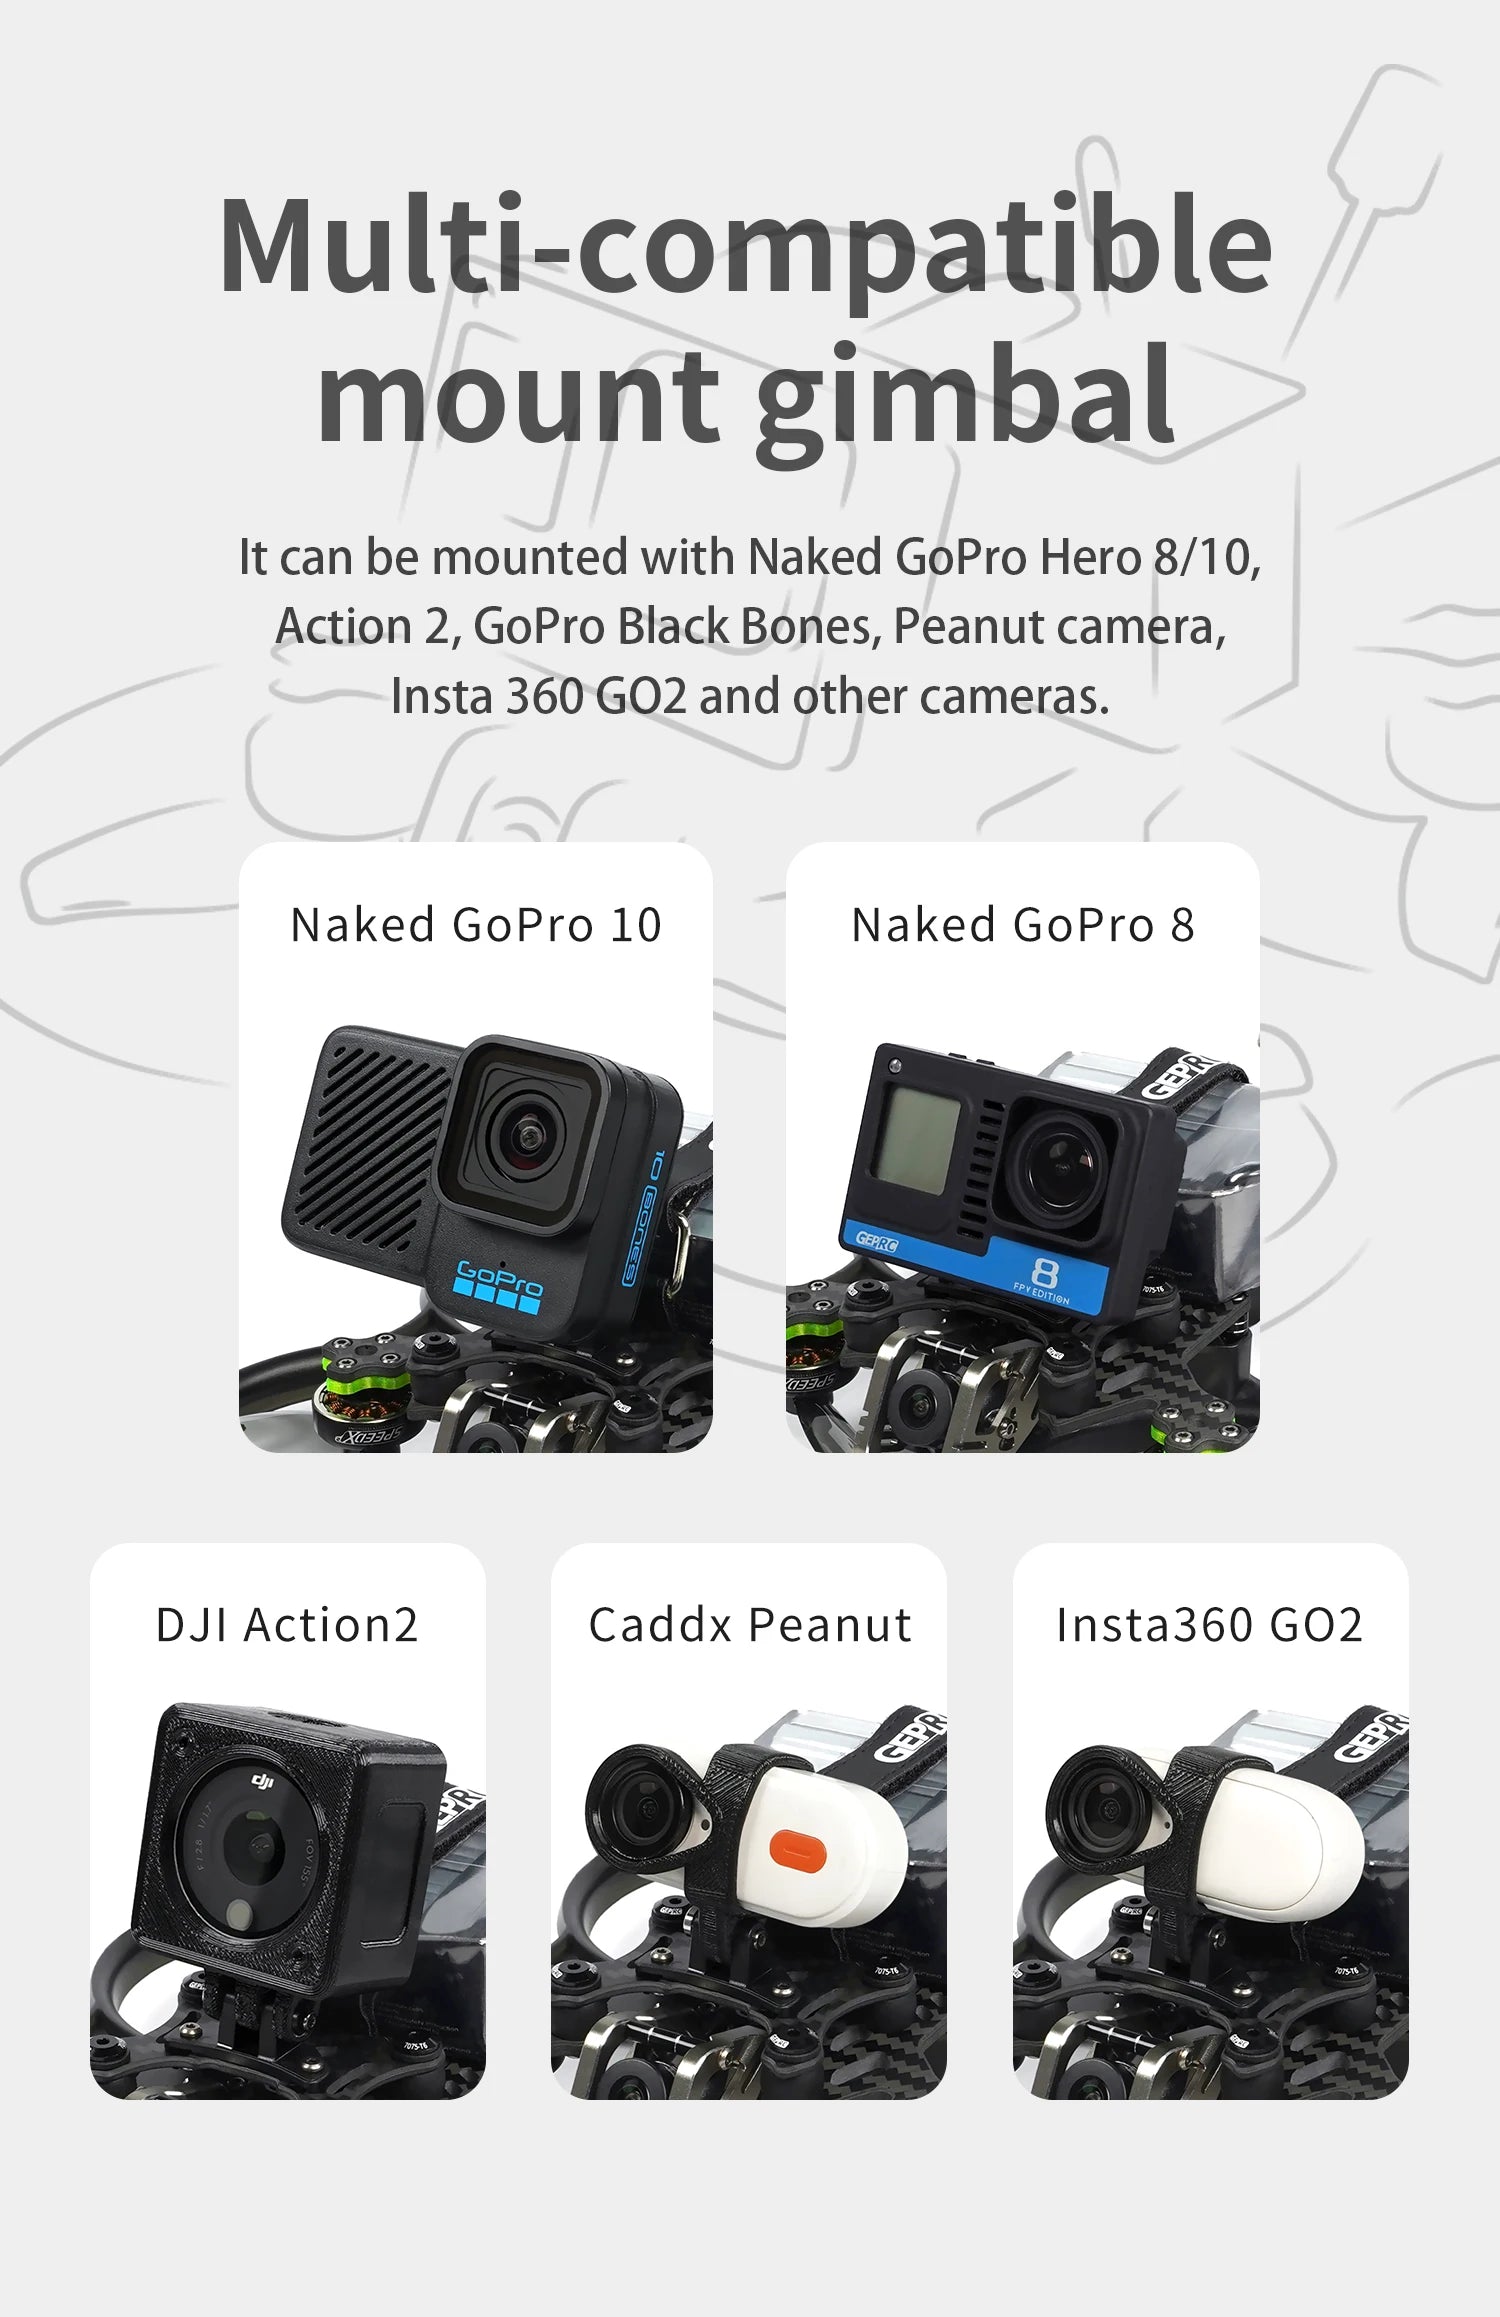 GEPRC Cinebot30 HD - Walksnail Avatar FPV, GEPRC Cinebot30 HD, gimbal can be mounted with Naked GoPro Hero 8/10, Action 2, Go